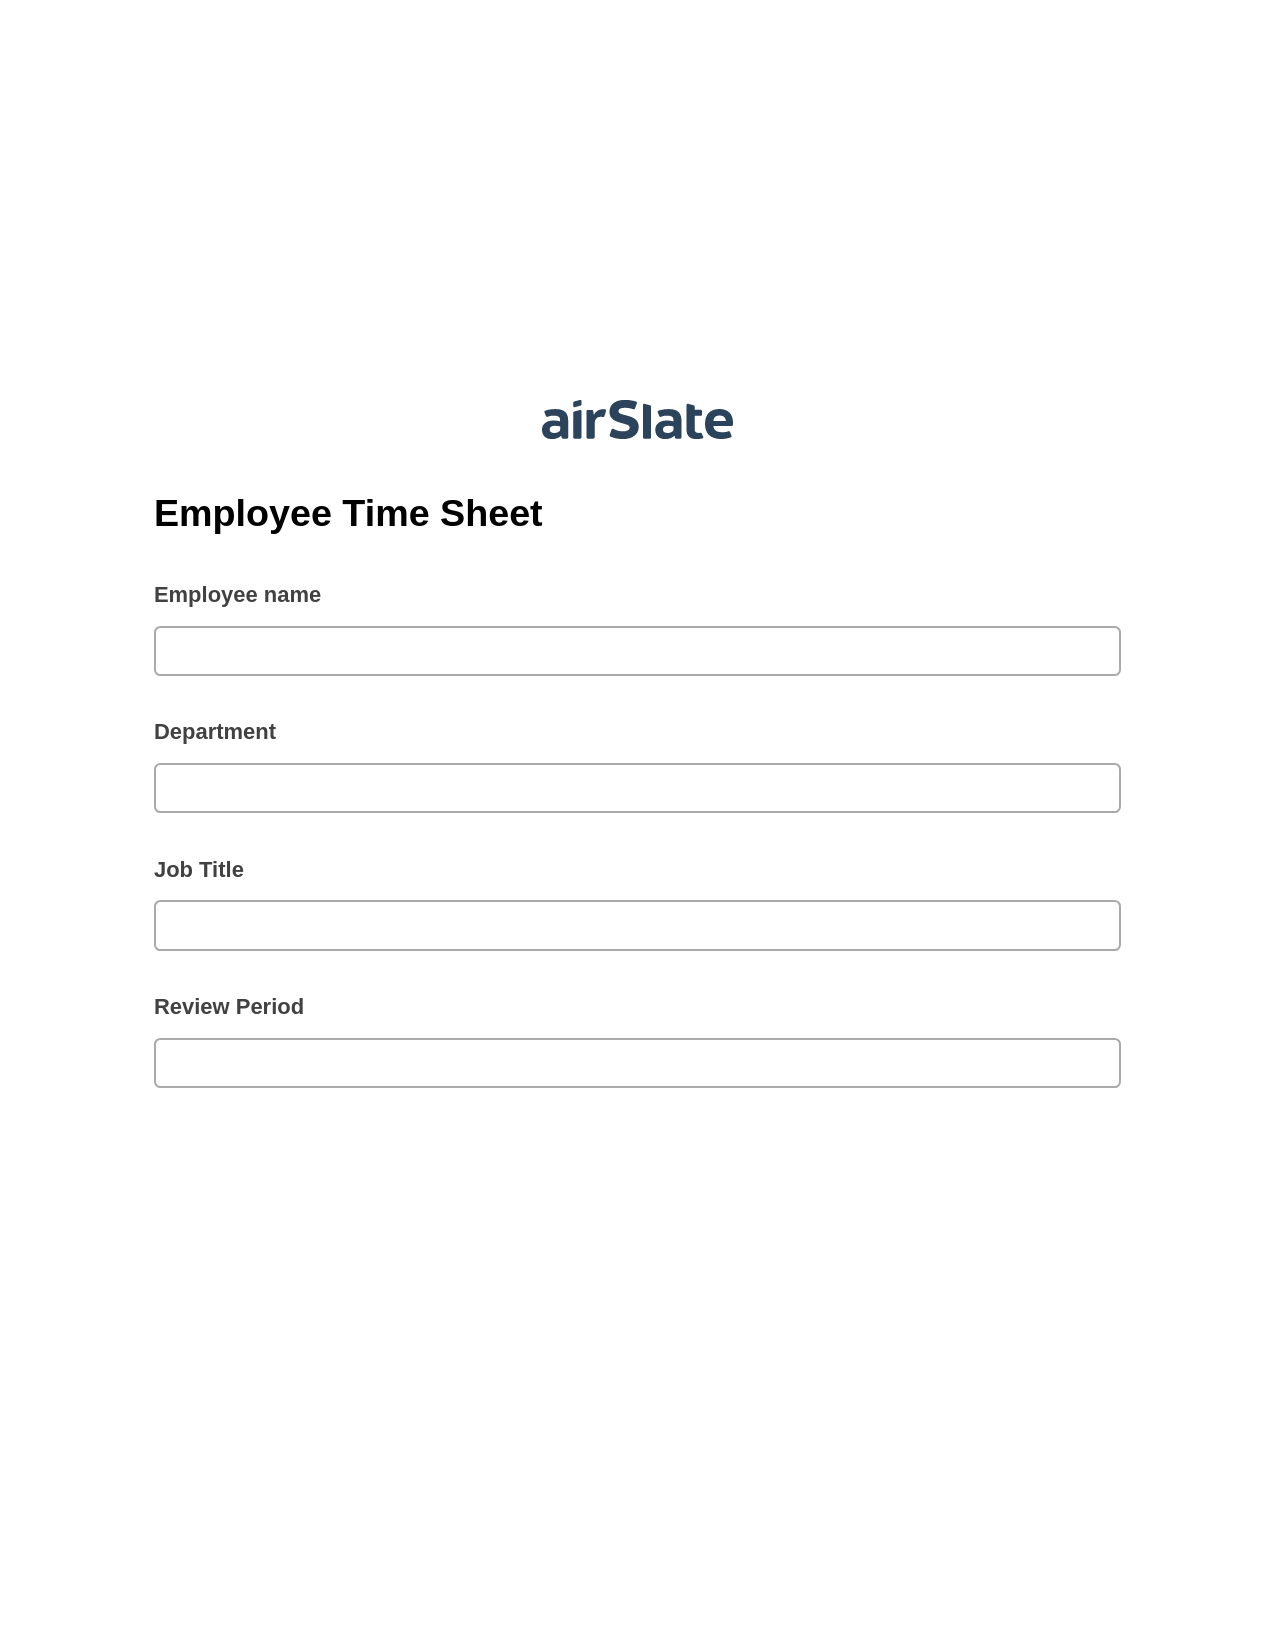 Multirole Employee Time Sheet Pre-fill from Office 365 Excel Bot, Create Salesforce Records Bot, Export to Salesforce Record Bot